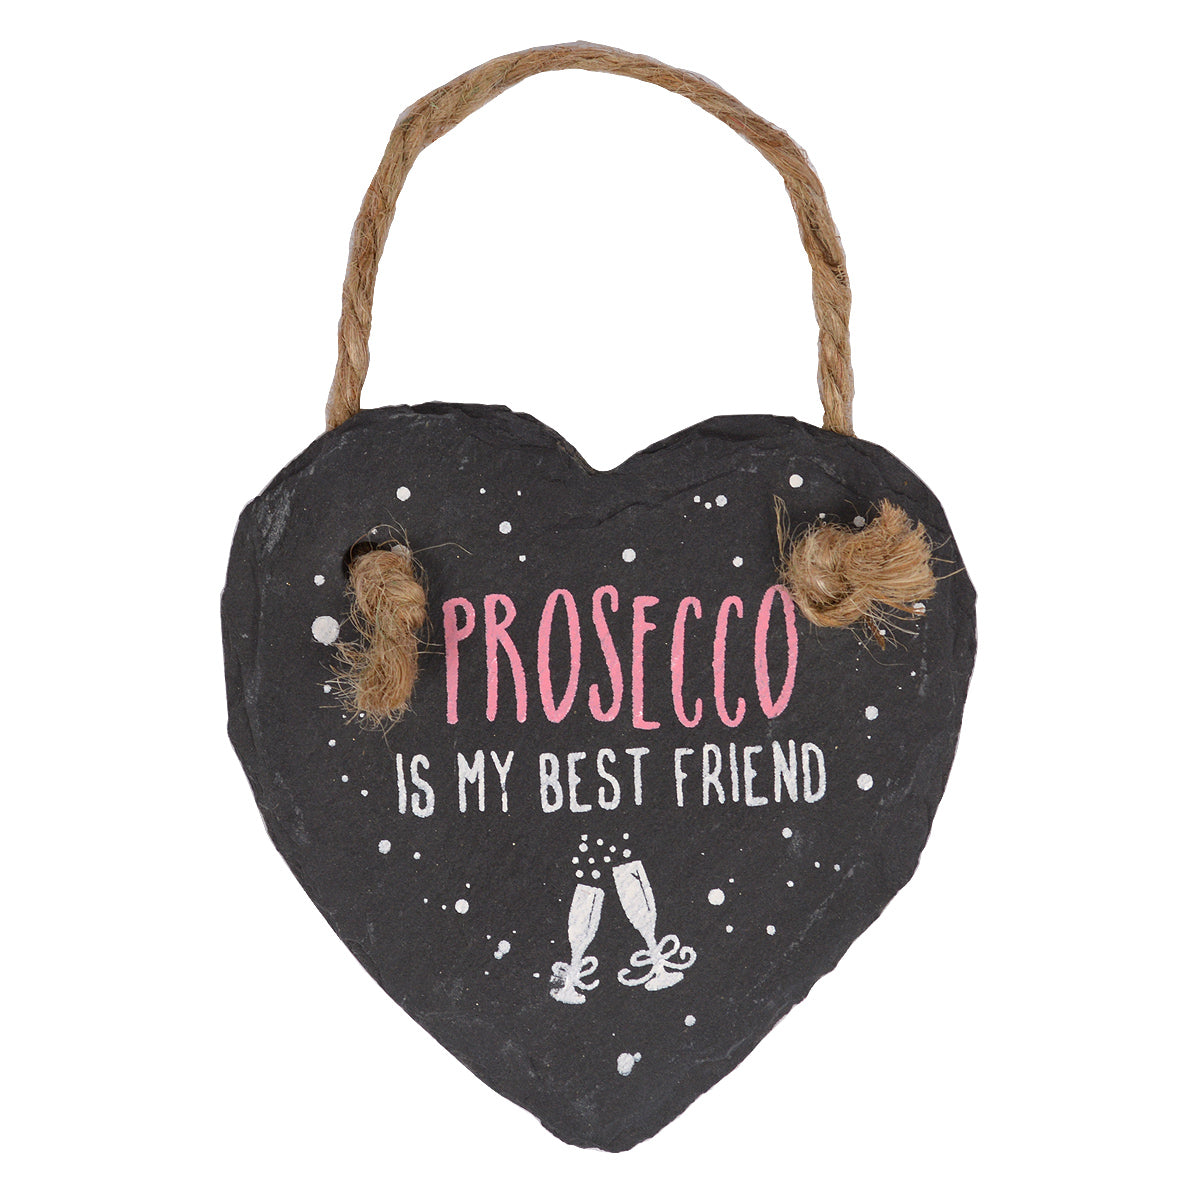 Prosecco Is My Best Friend Mini Heart Shaped Hanging Slate Plaque